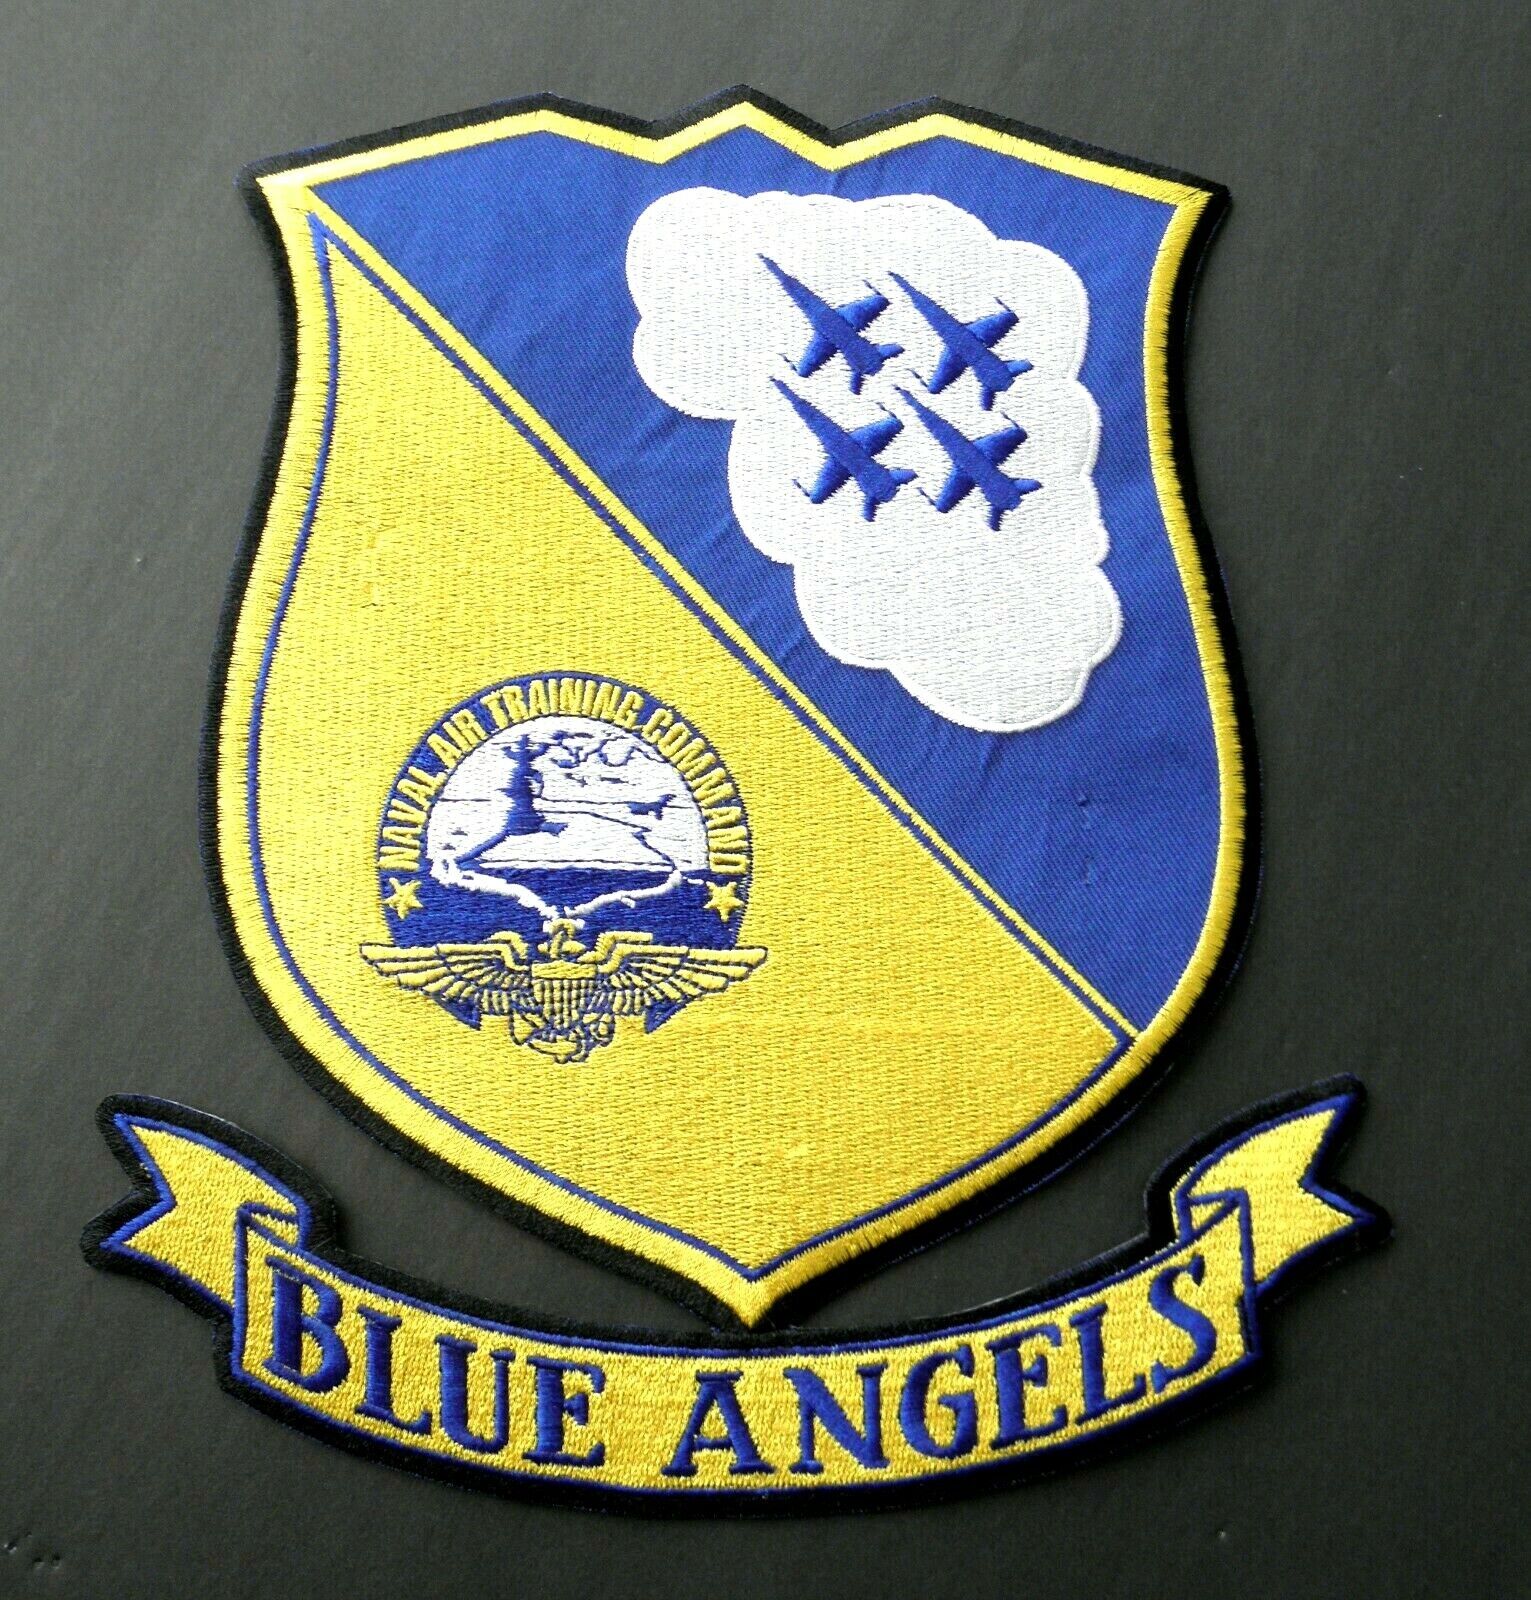 US NAVY BLUE ANGELS CUTOUT LARGE EMBROIDERED JACKET PATCH 8.5 INCHES USN 